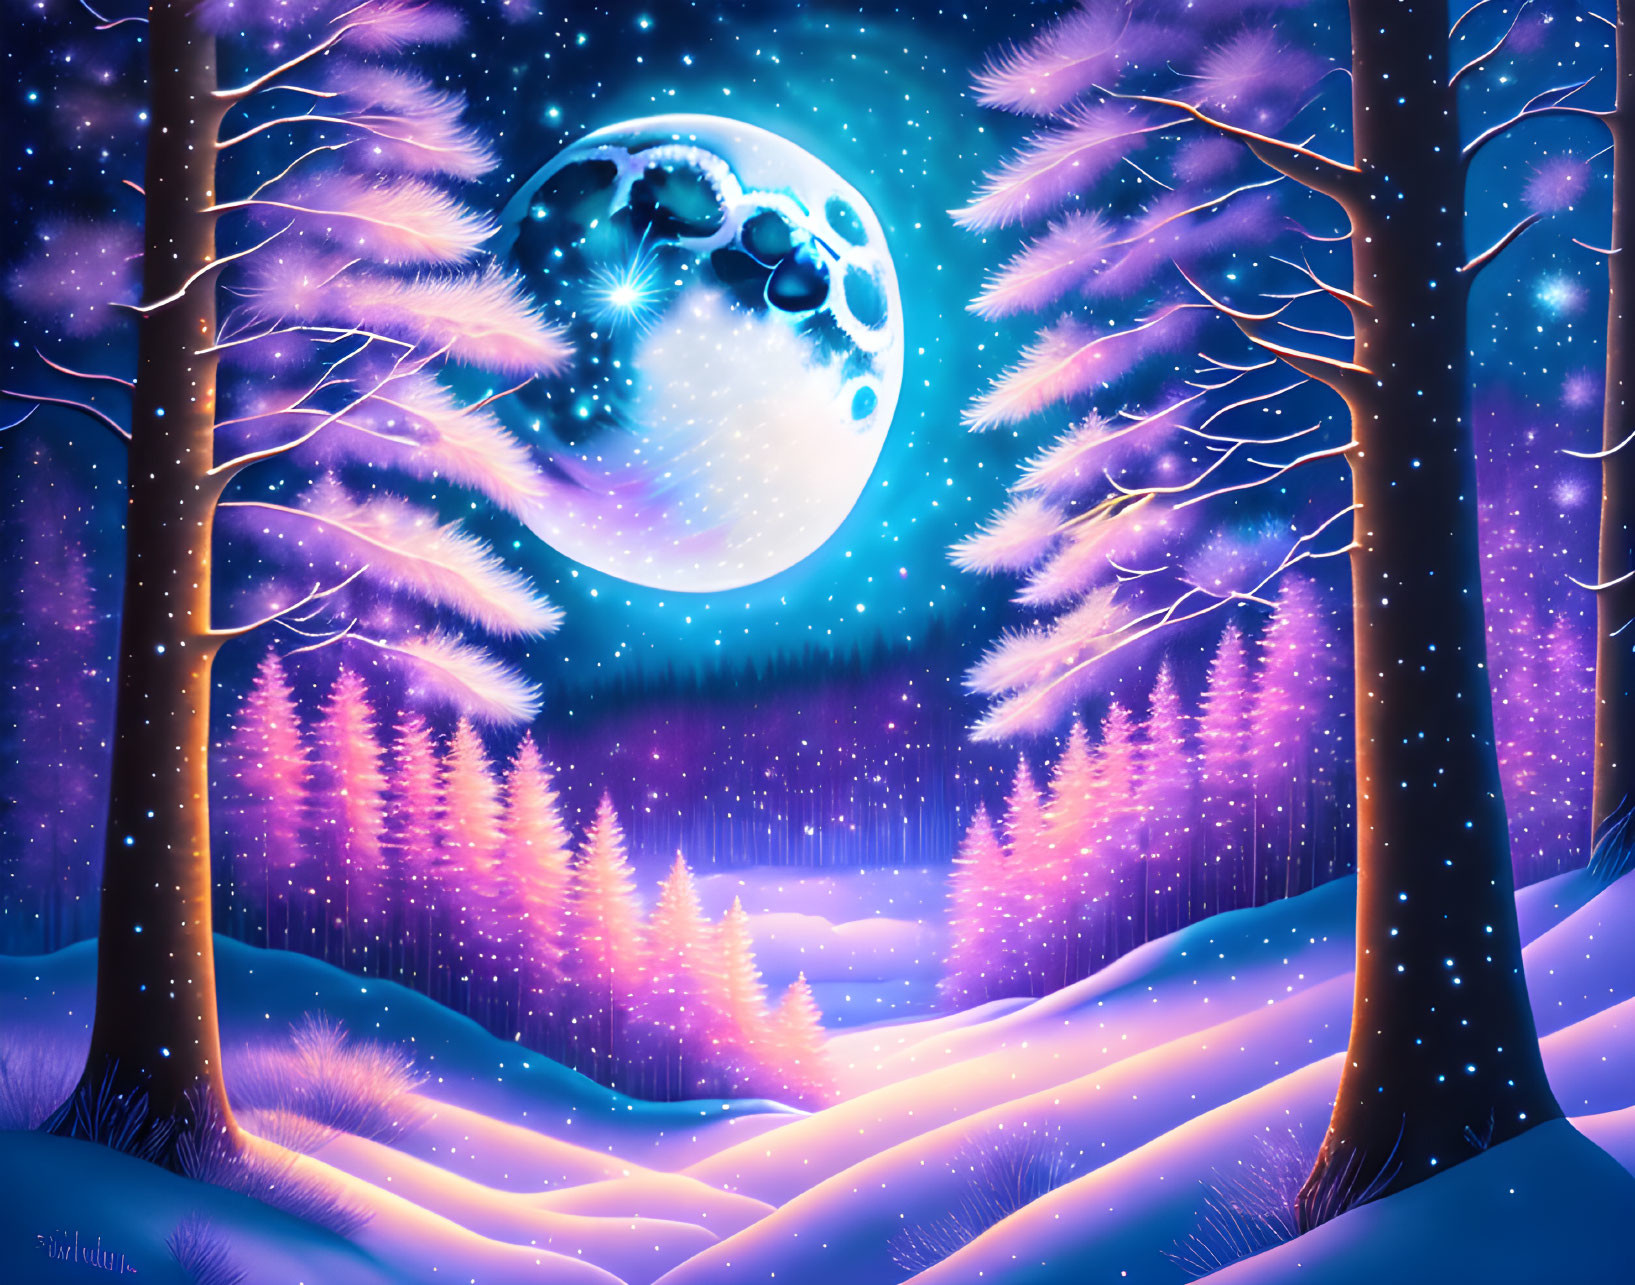 Digital illustration: Snowy forest night scene with glowing trees under luminous moon